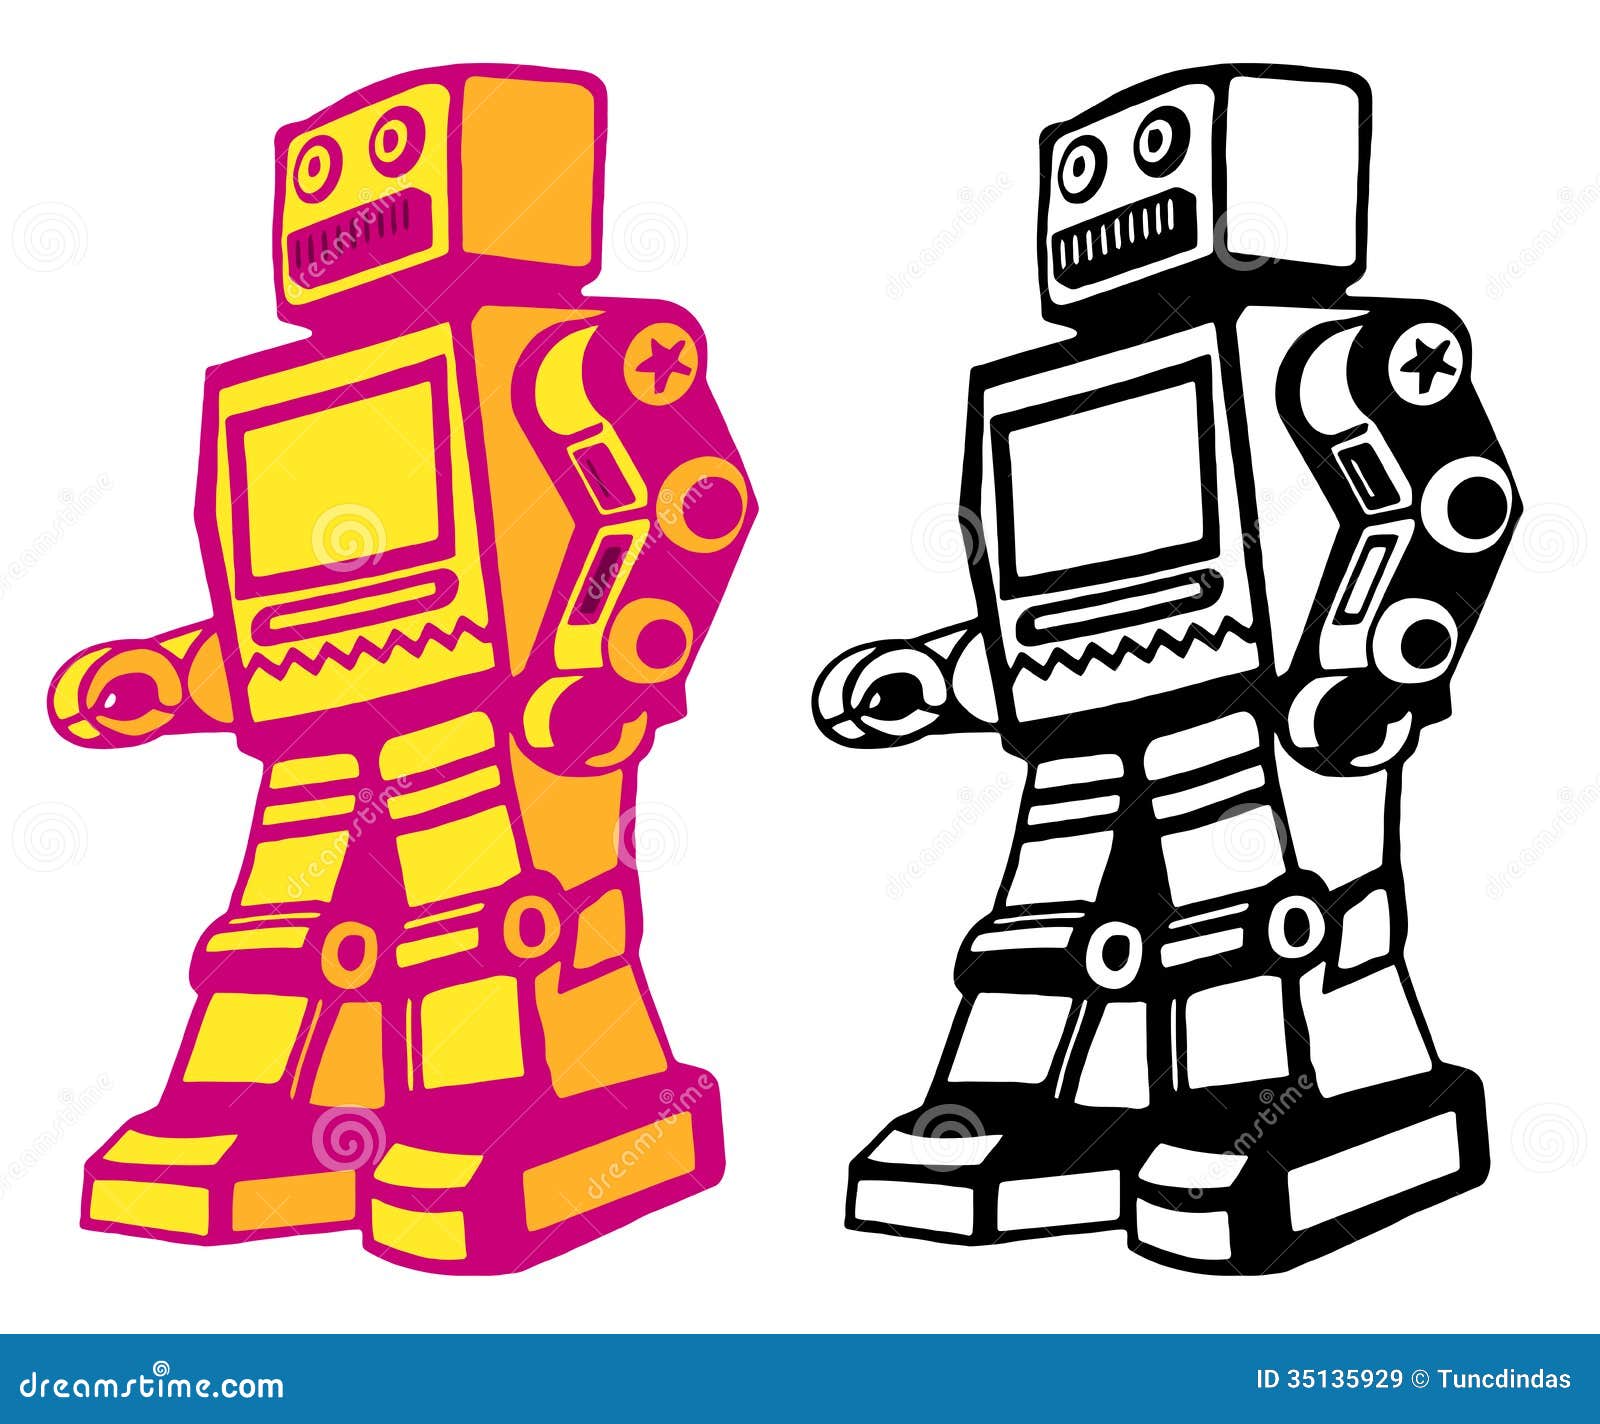 robot toy clipart - photo #46